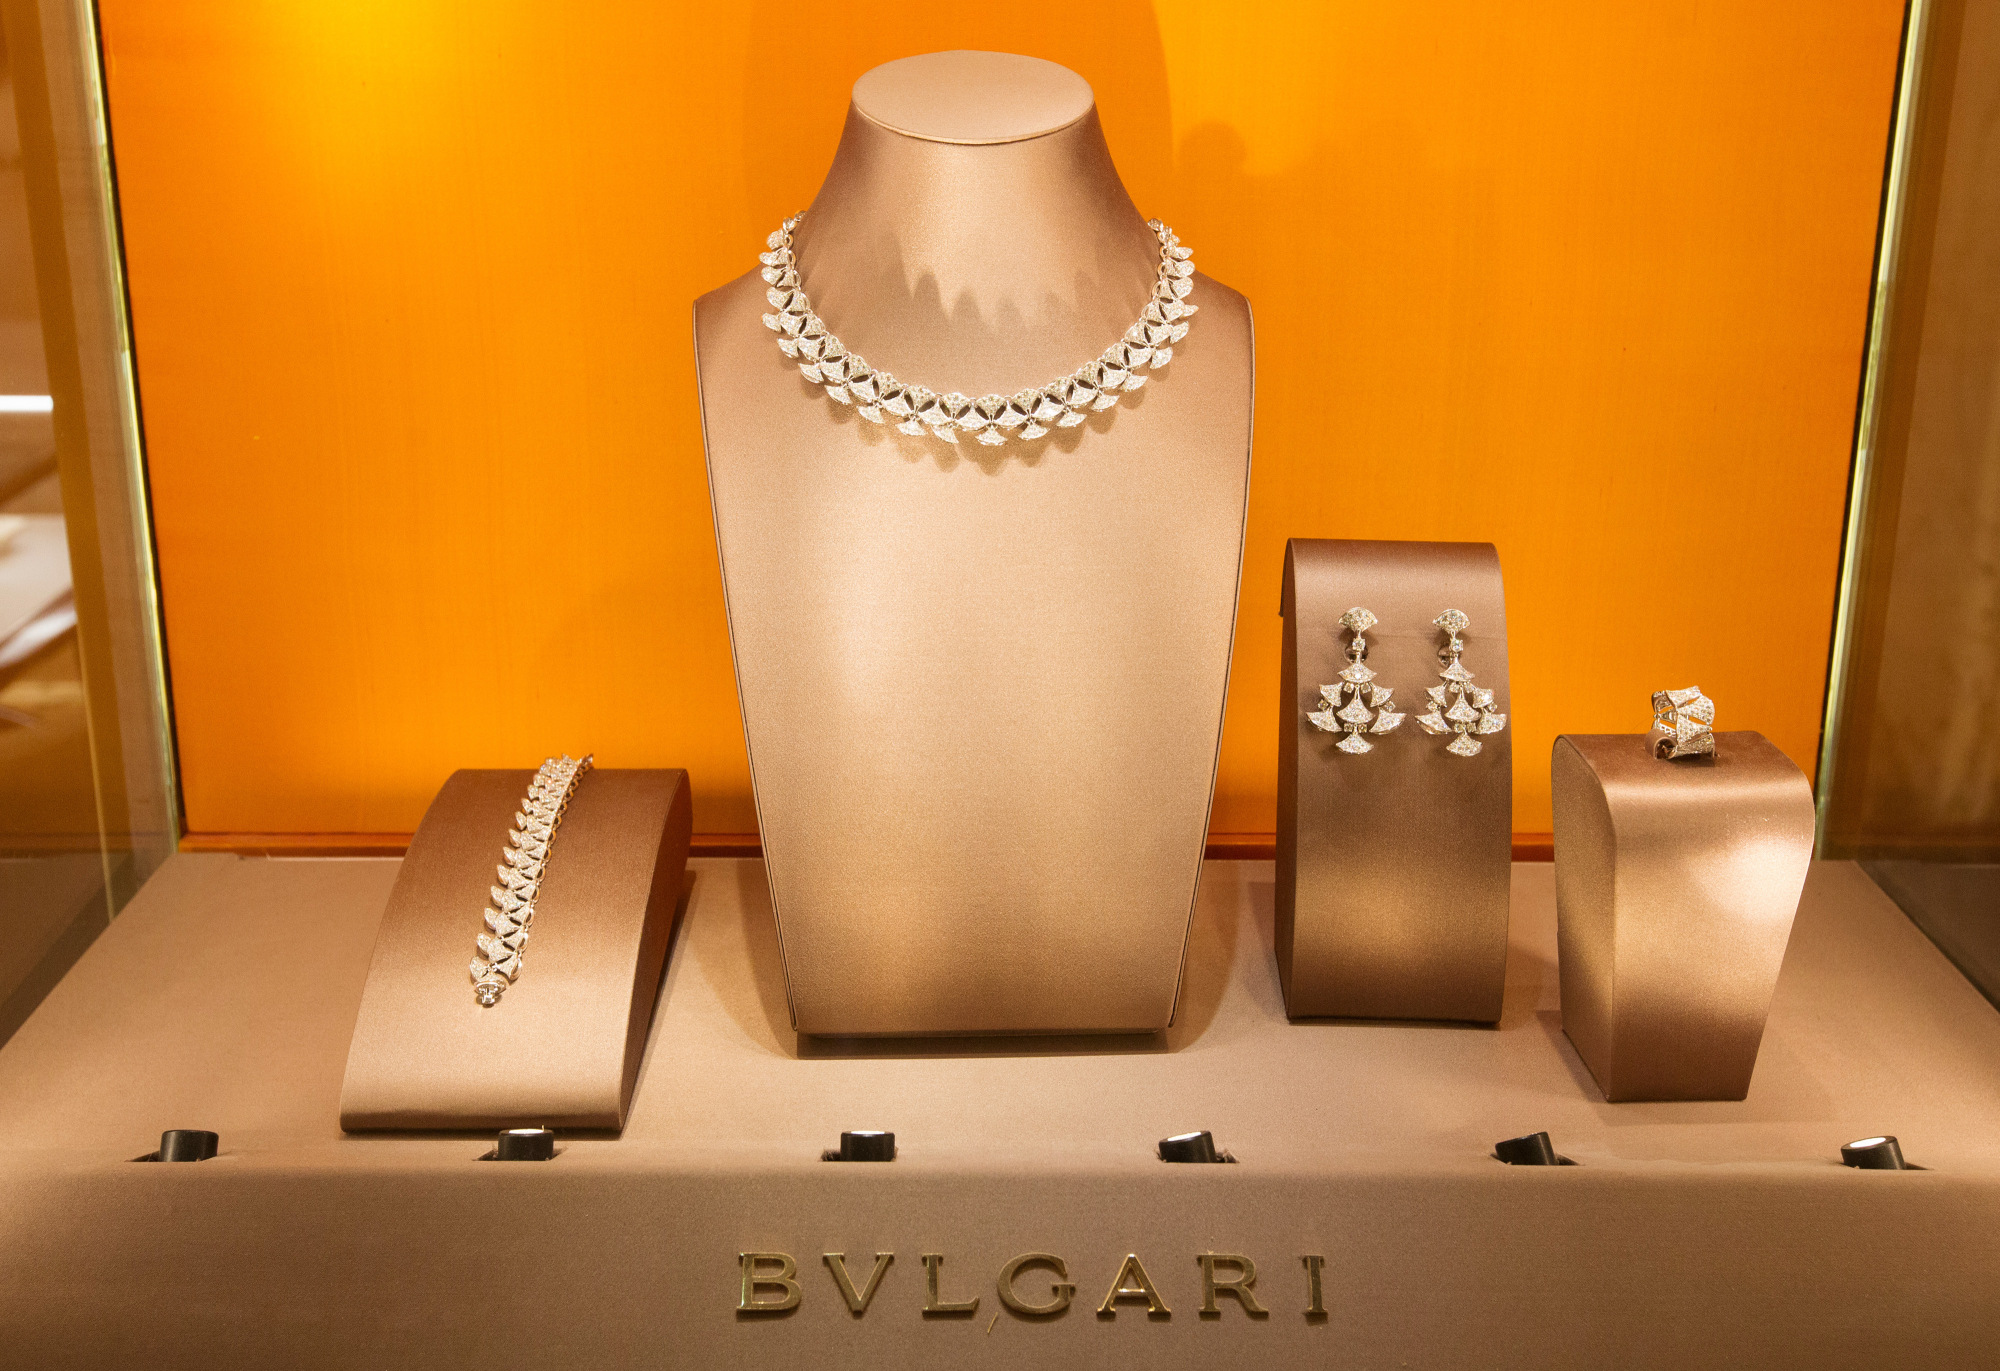 LVMH Enjoys Massive Boost in Revenue from Watch and Jewelry Sales - Israeli  Diamond Industry